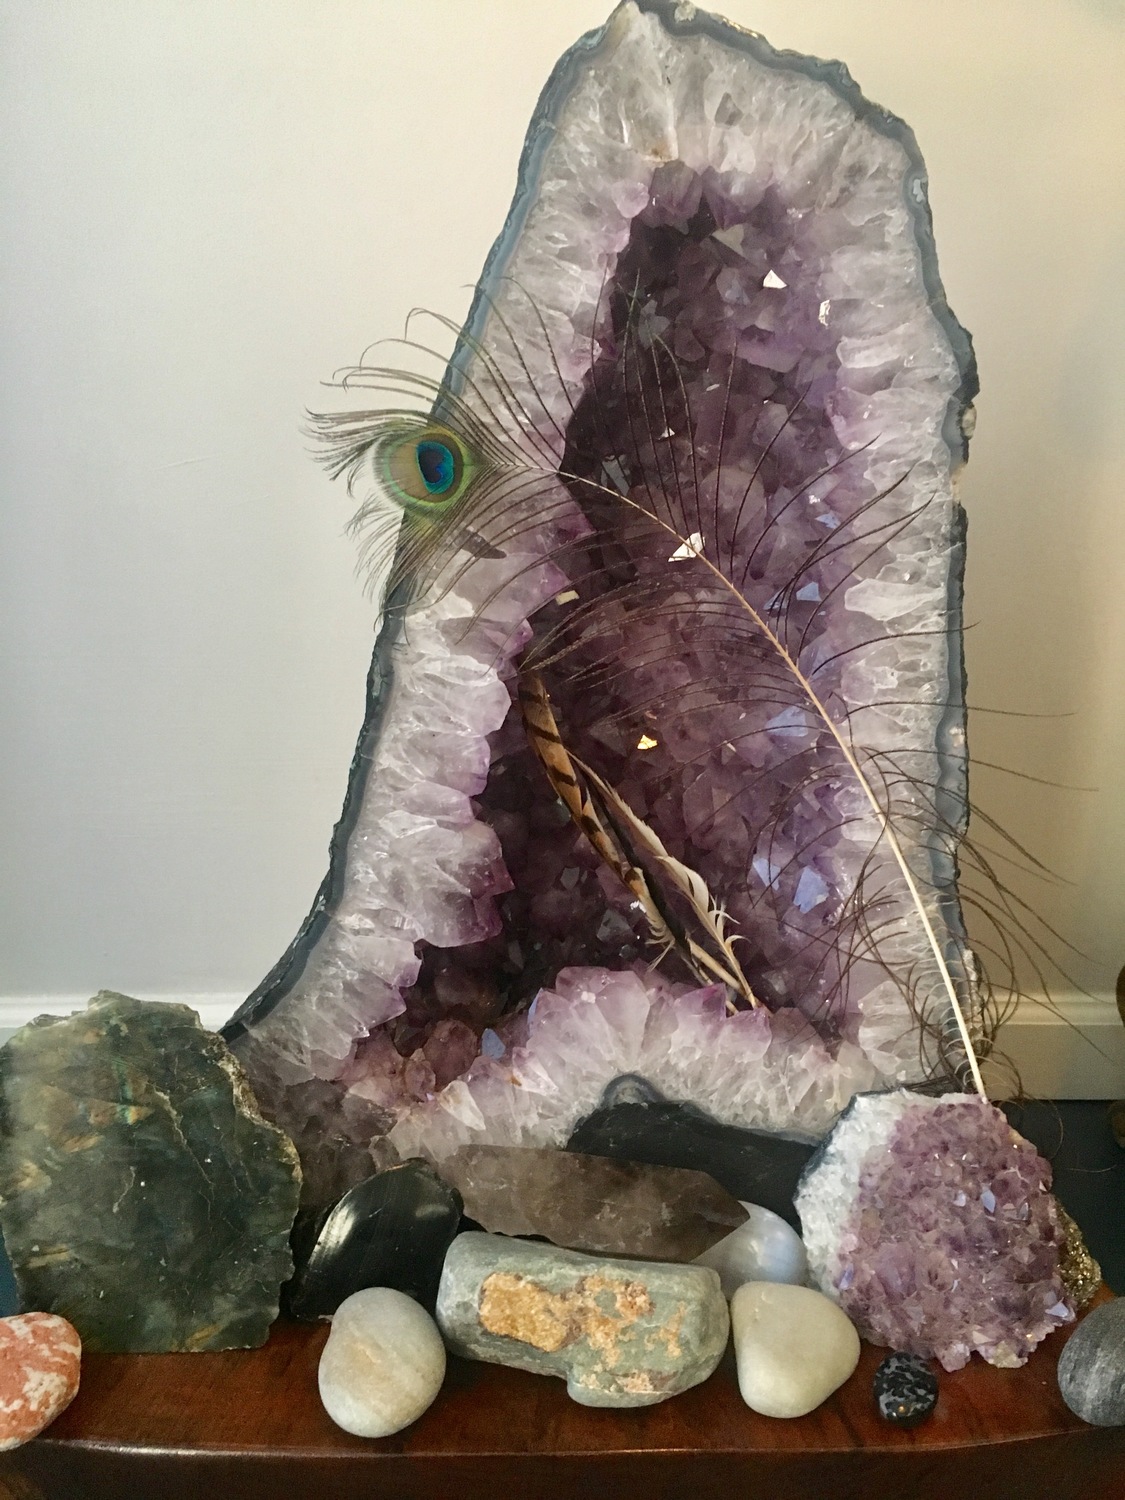 Gallery Photo of Amethyst is a powerful healing crystal!